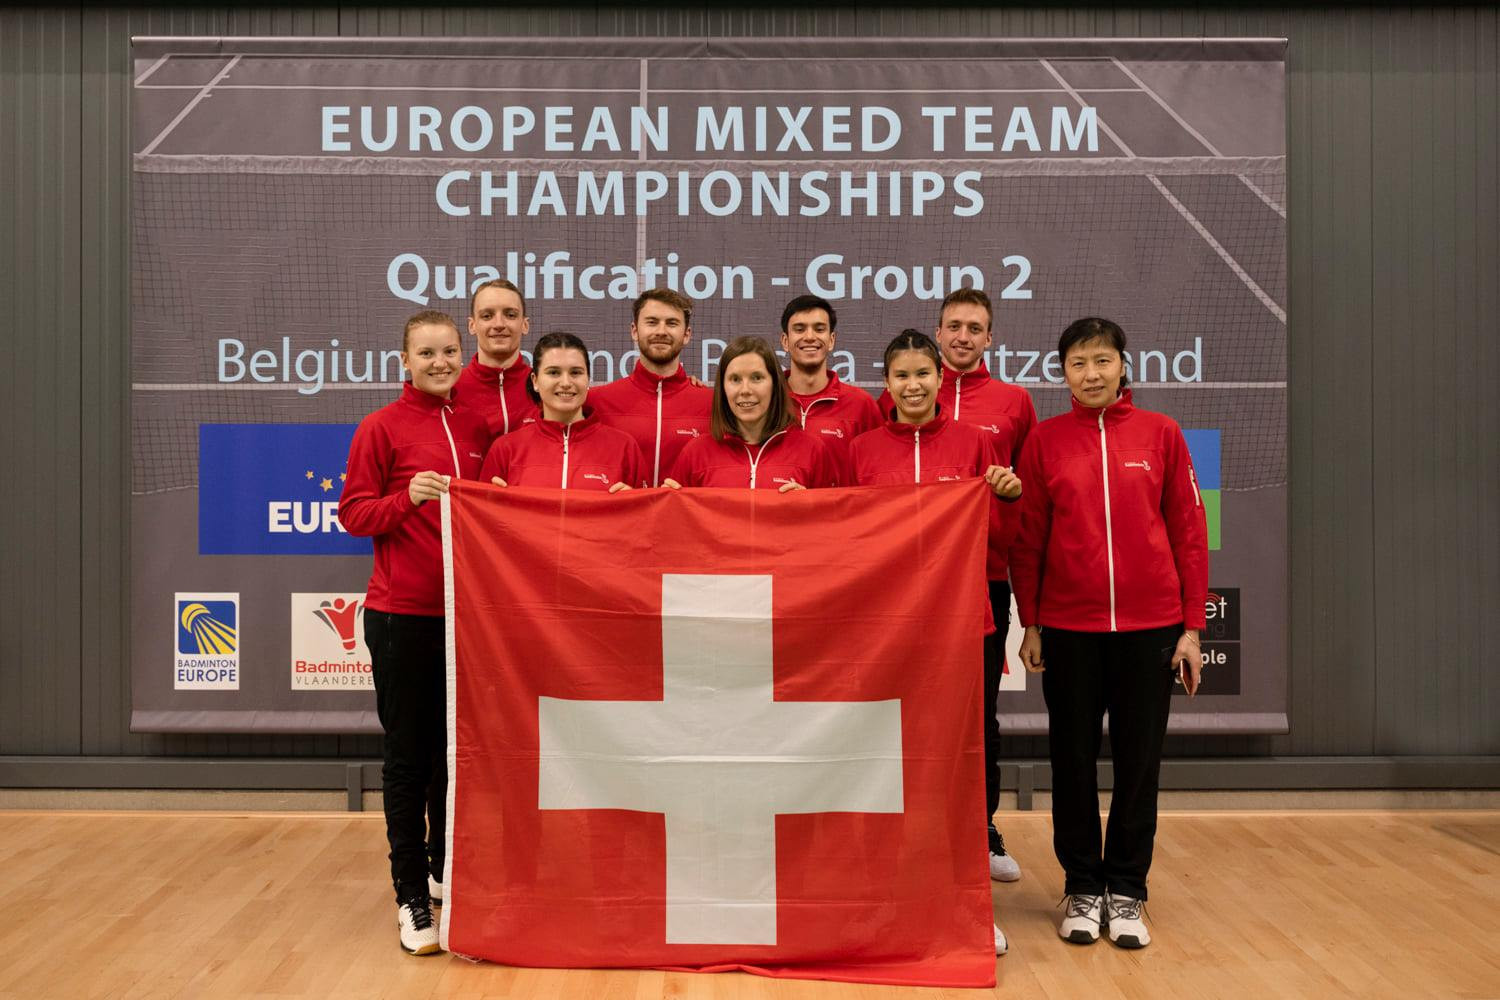 Switzerland bounced back from defeat yesterday to beat Poland in Group 2 ©Facebook/Badminton Europe